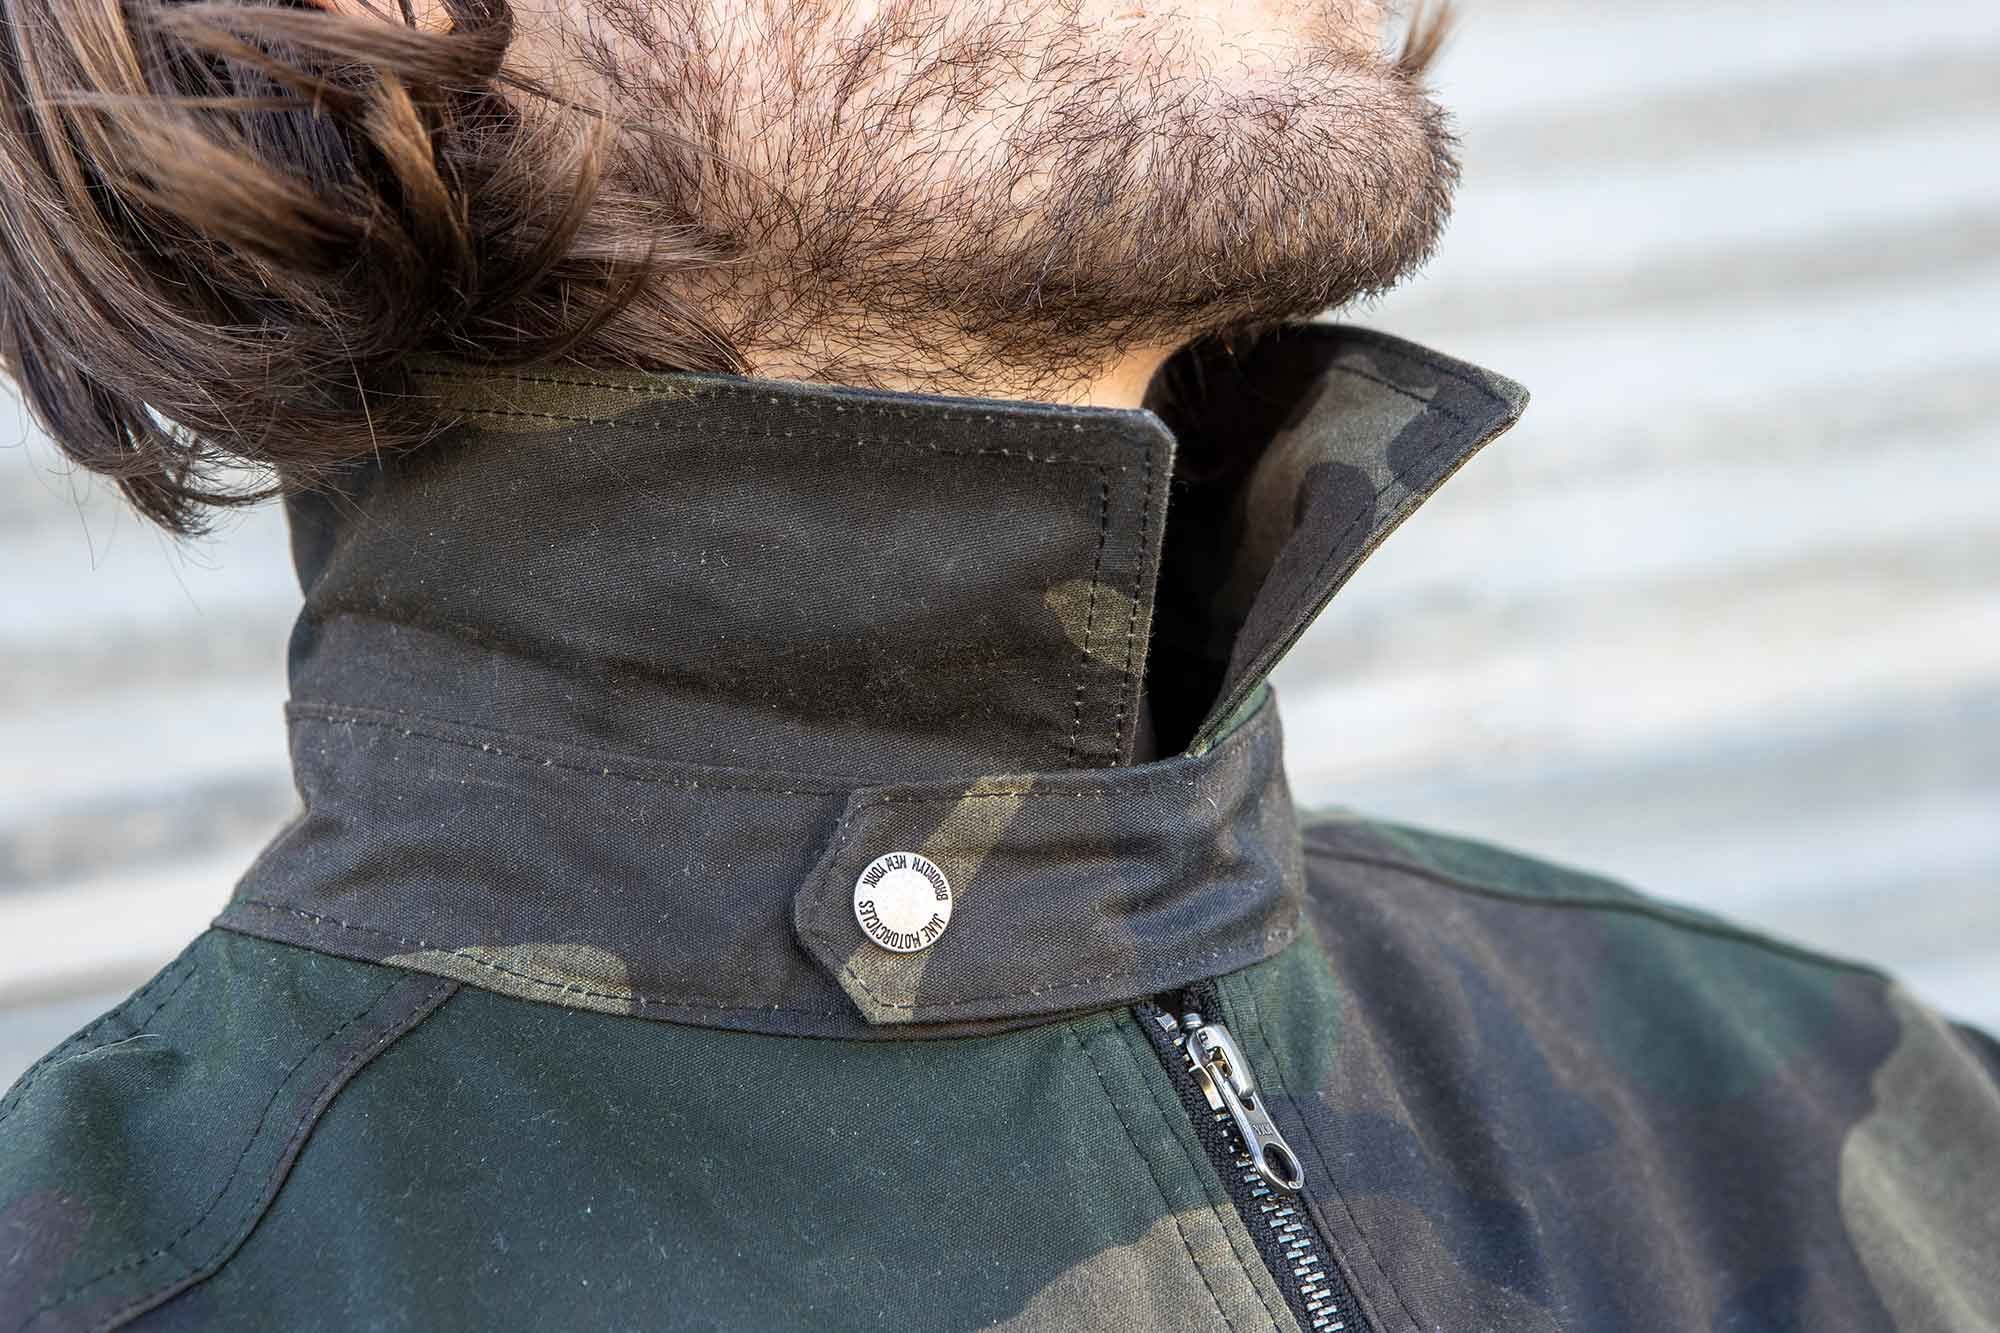 A snap on the collar allows for added wind protection when temperatures drop.